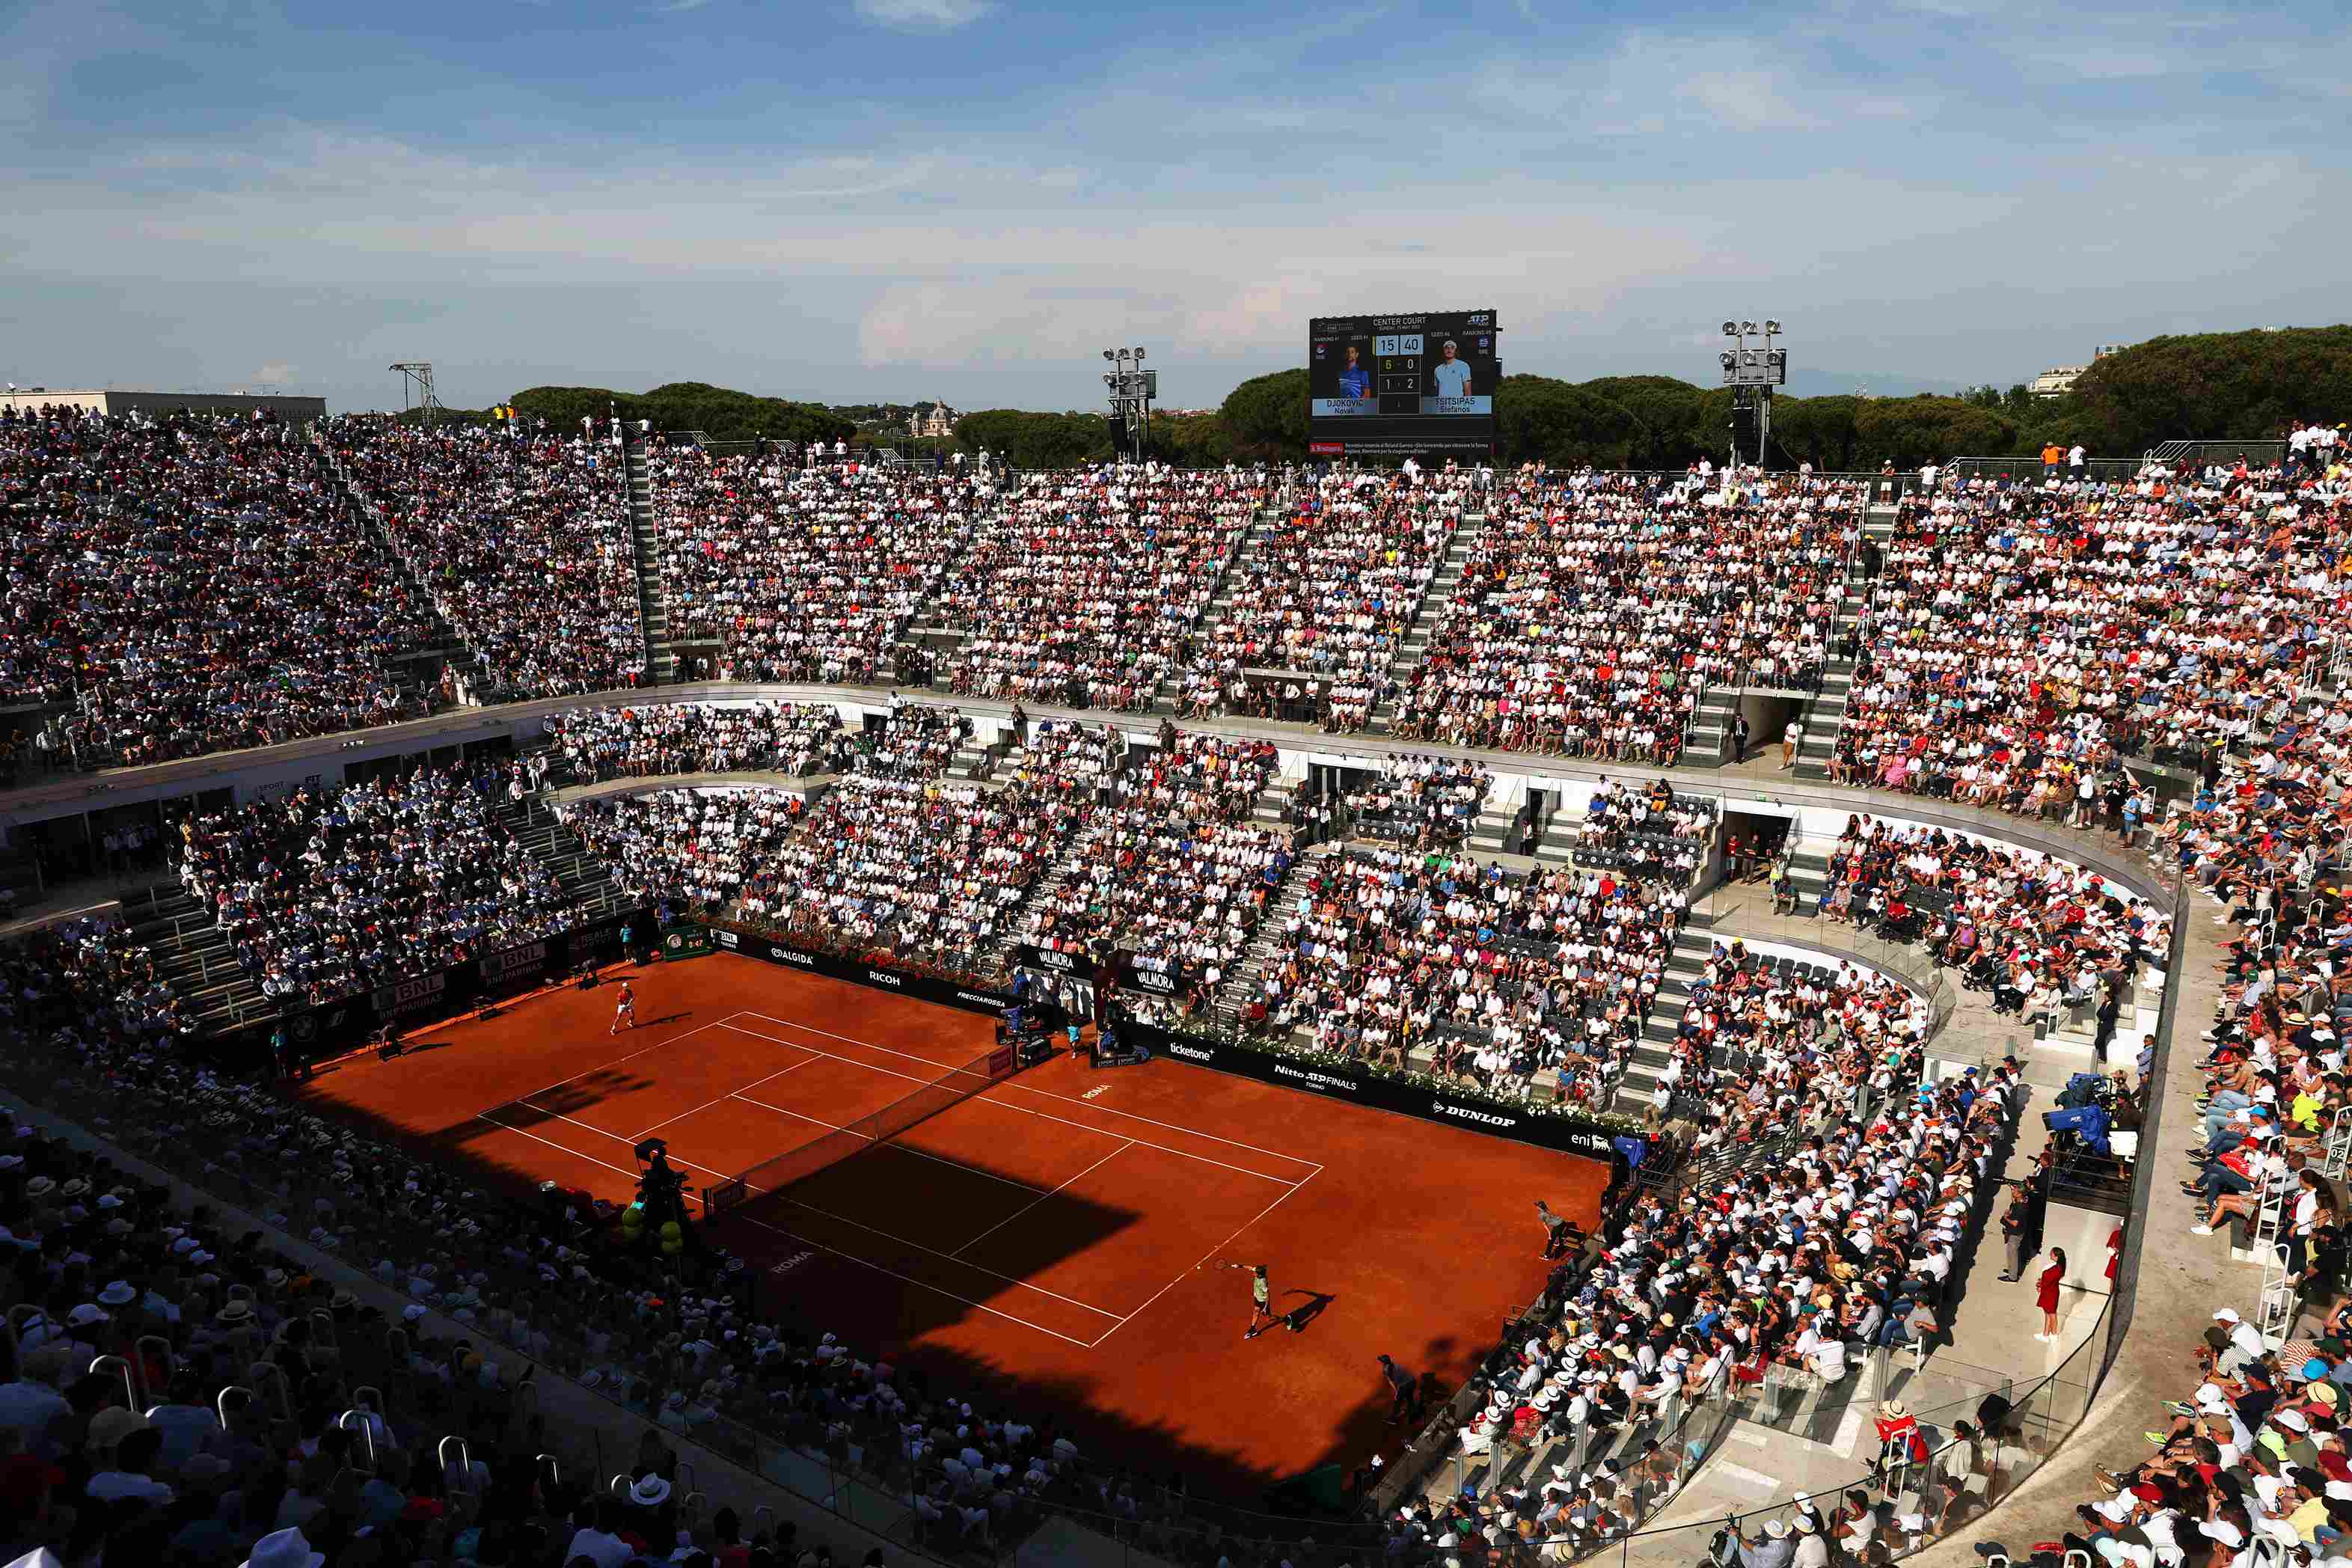 Italian Open 2023: Schedule of Play for Thursday May 18 - Tennis Connected